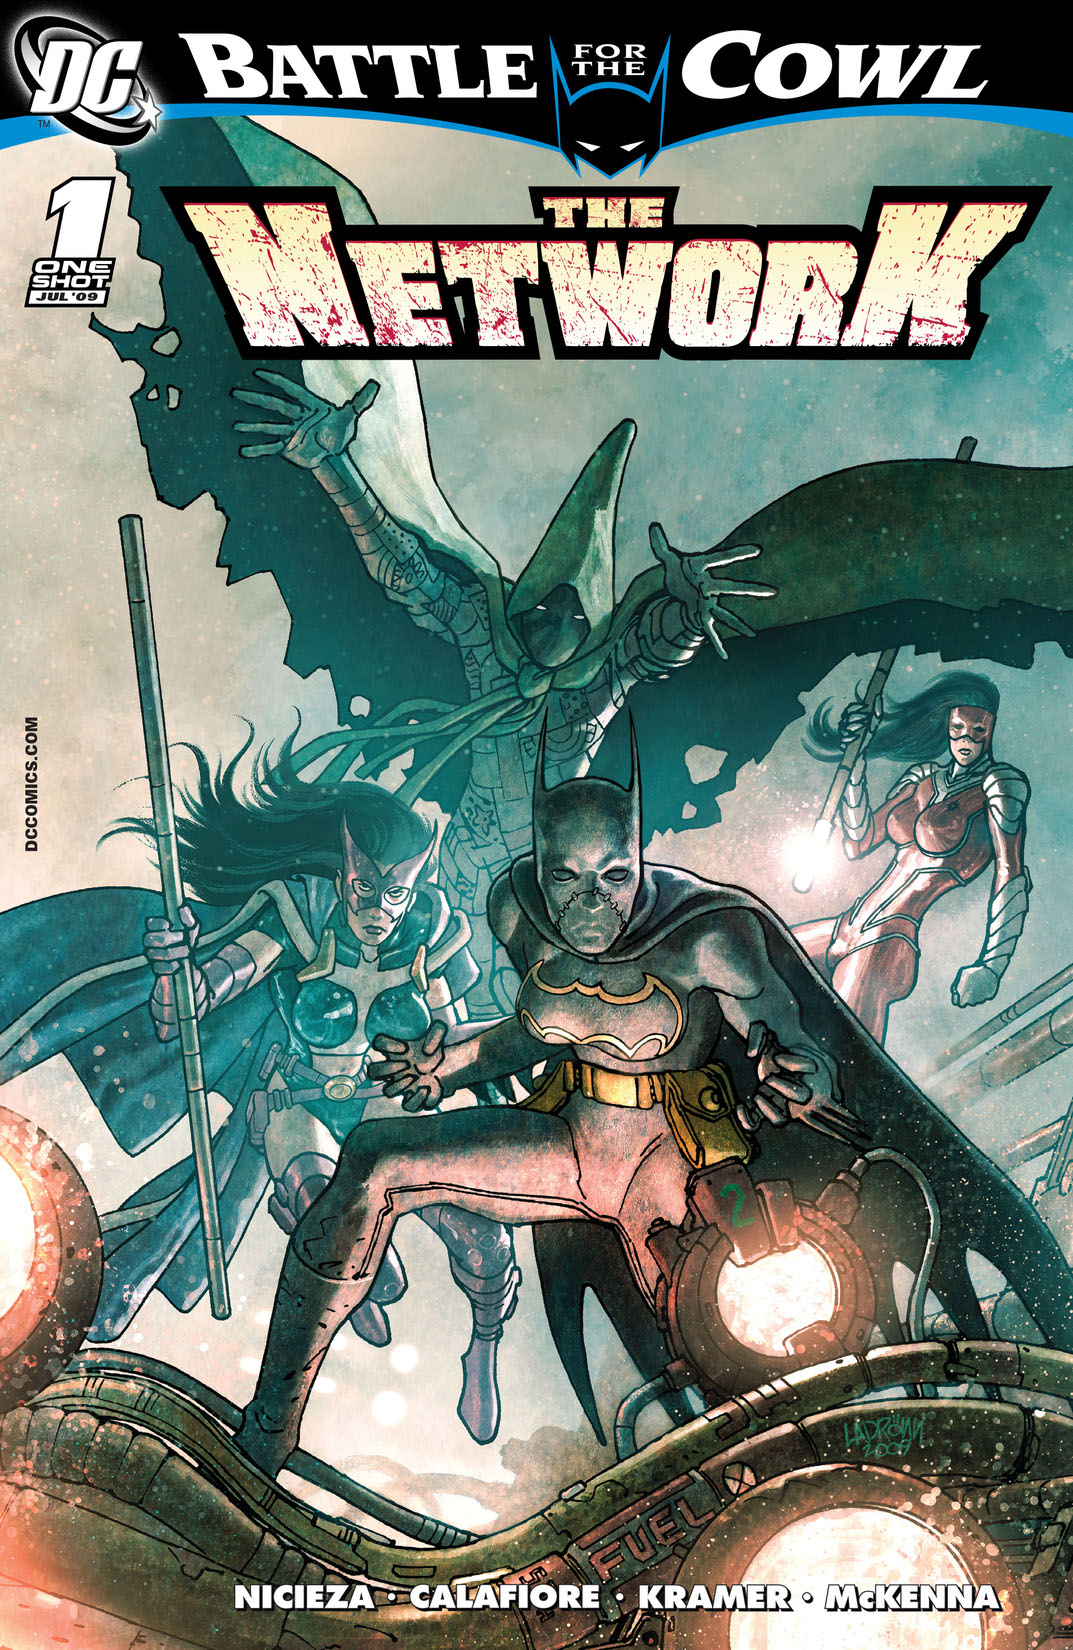 Batman: Battle for the Cowl: The Network #1 preview images